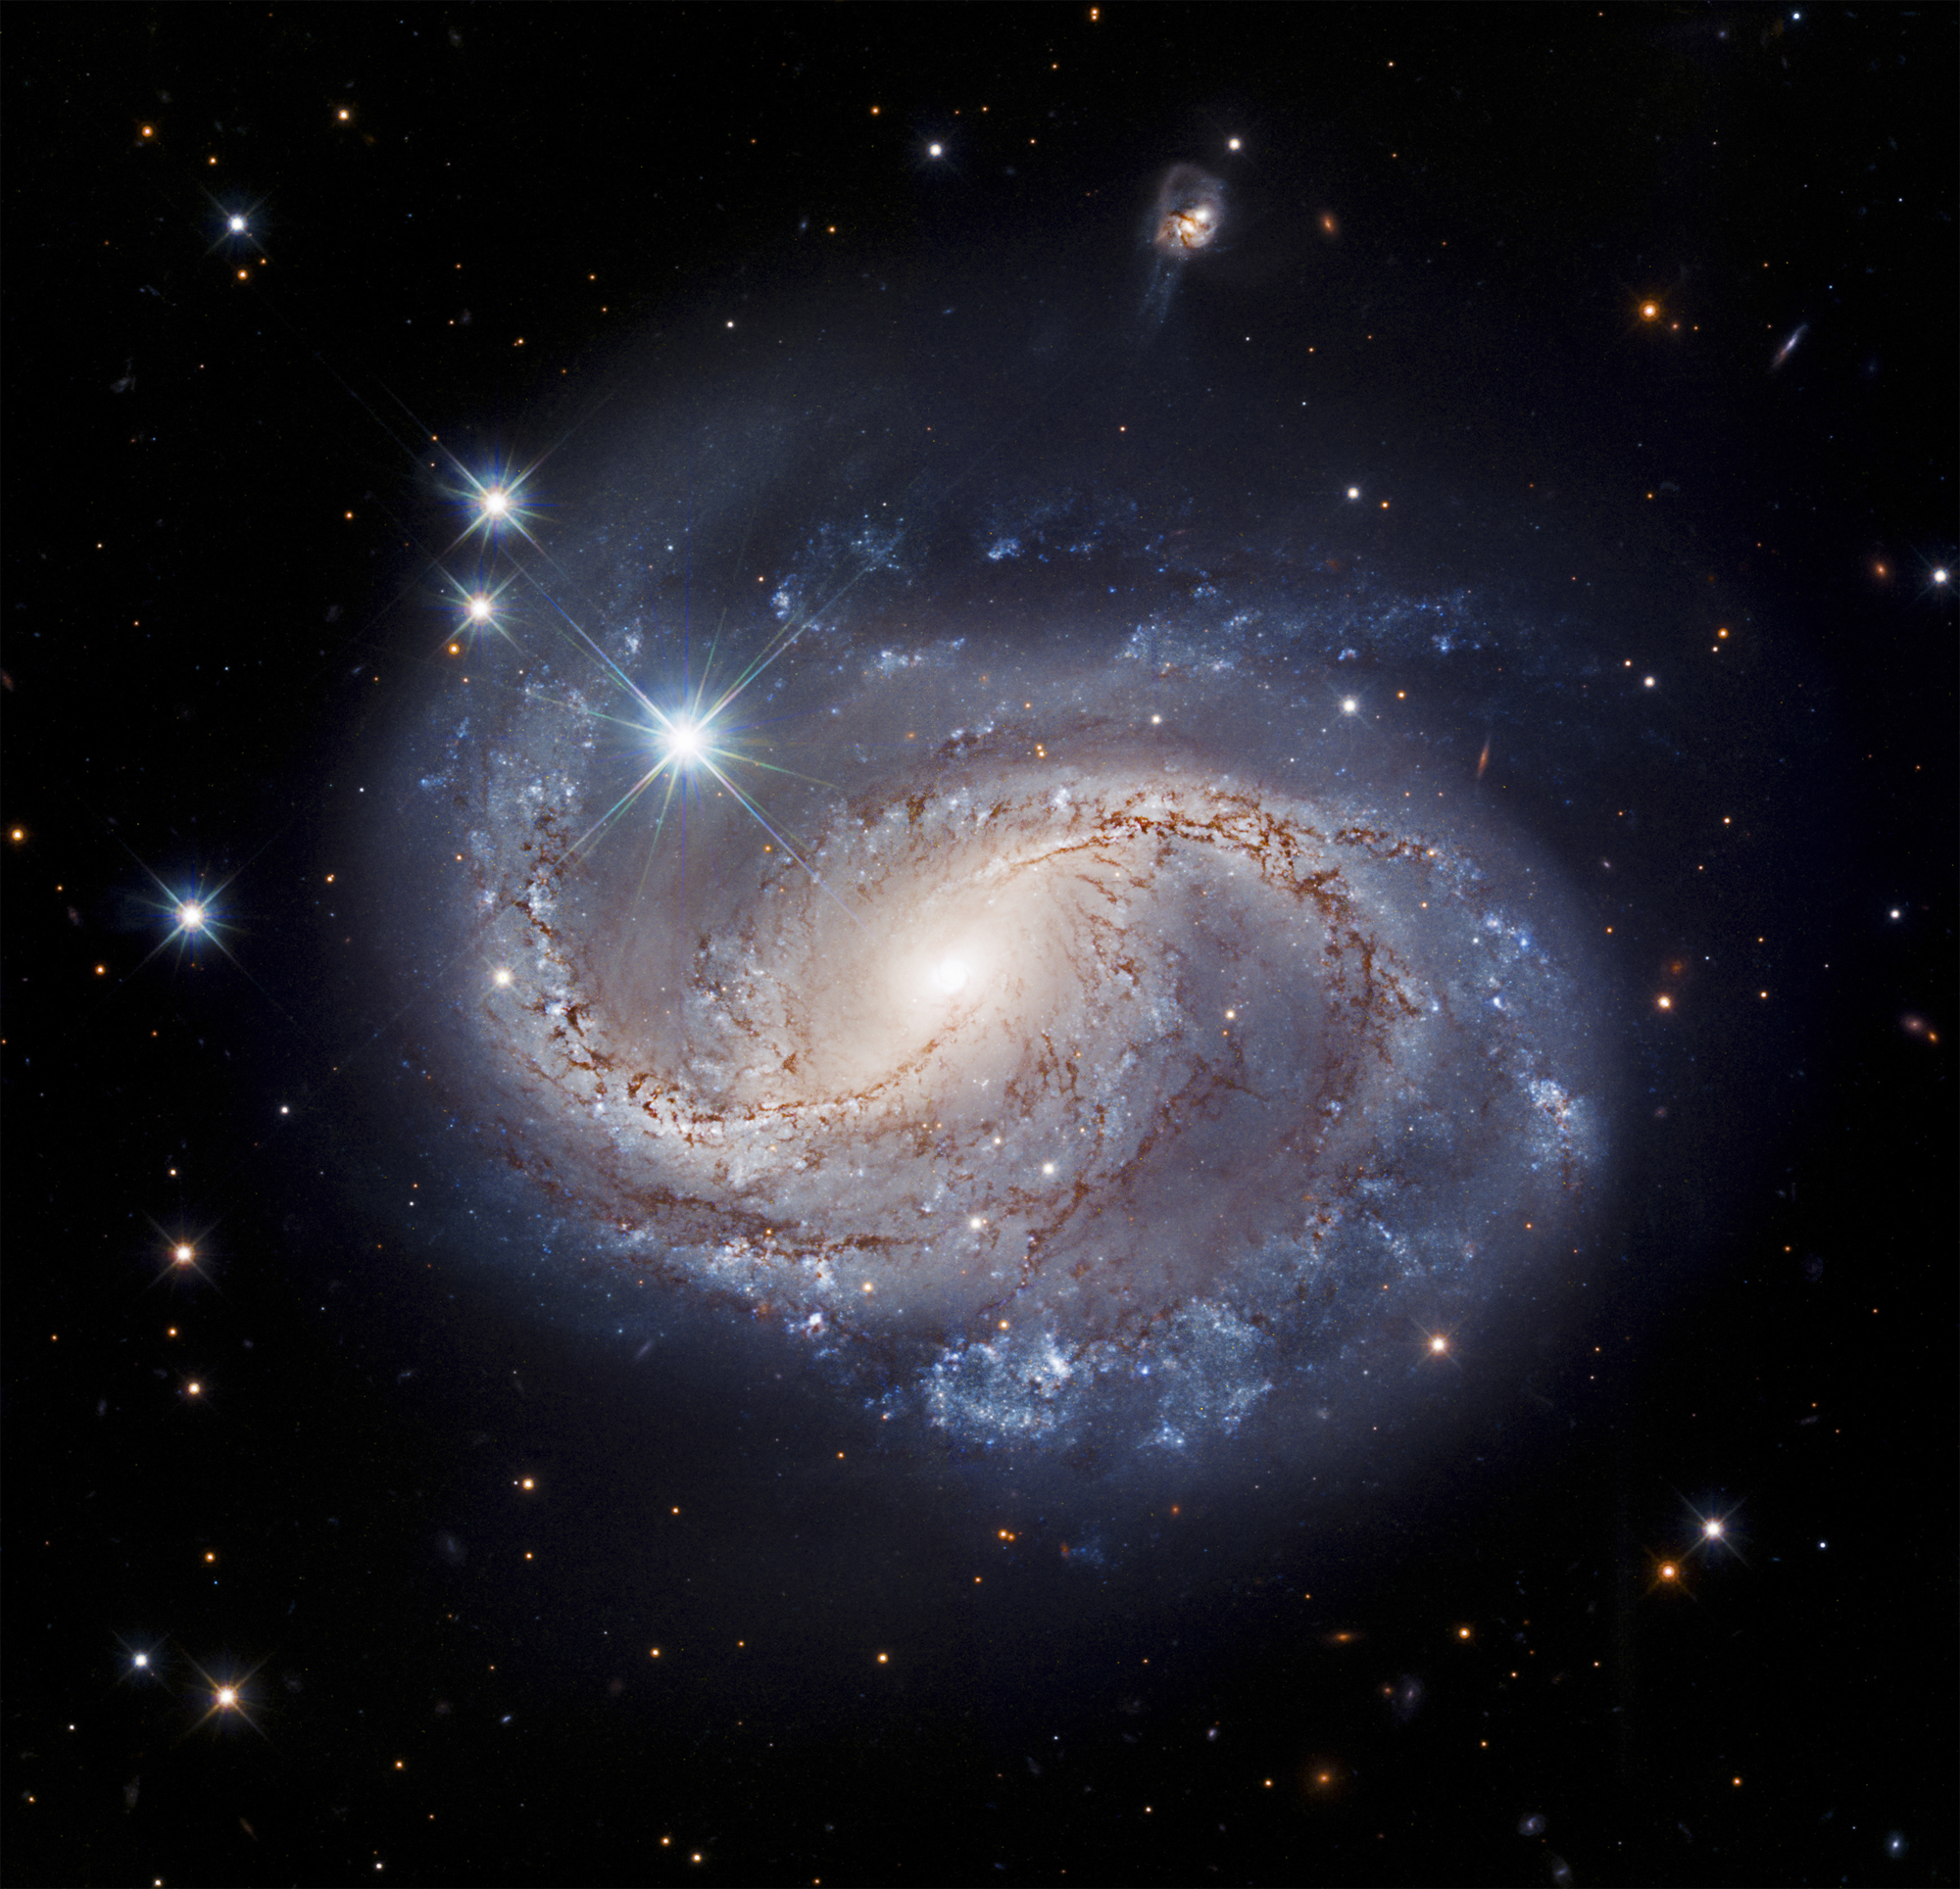 Hubble Space Telescope photo of the spiral galaxy NGC 6956.